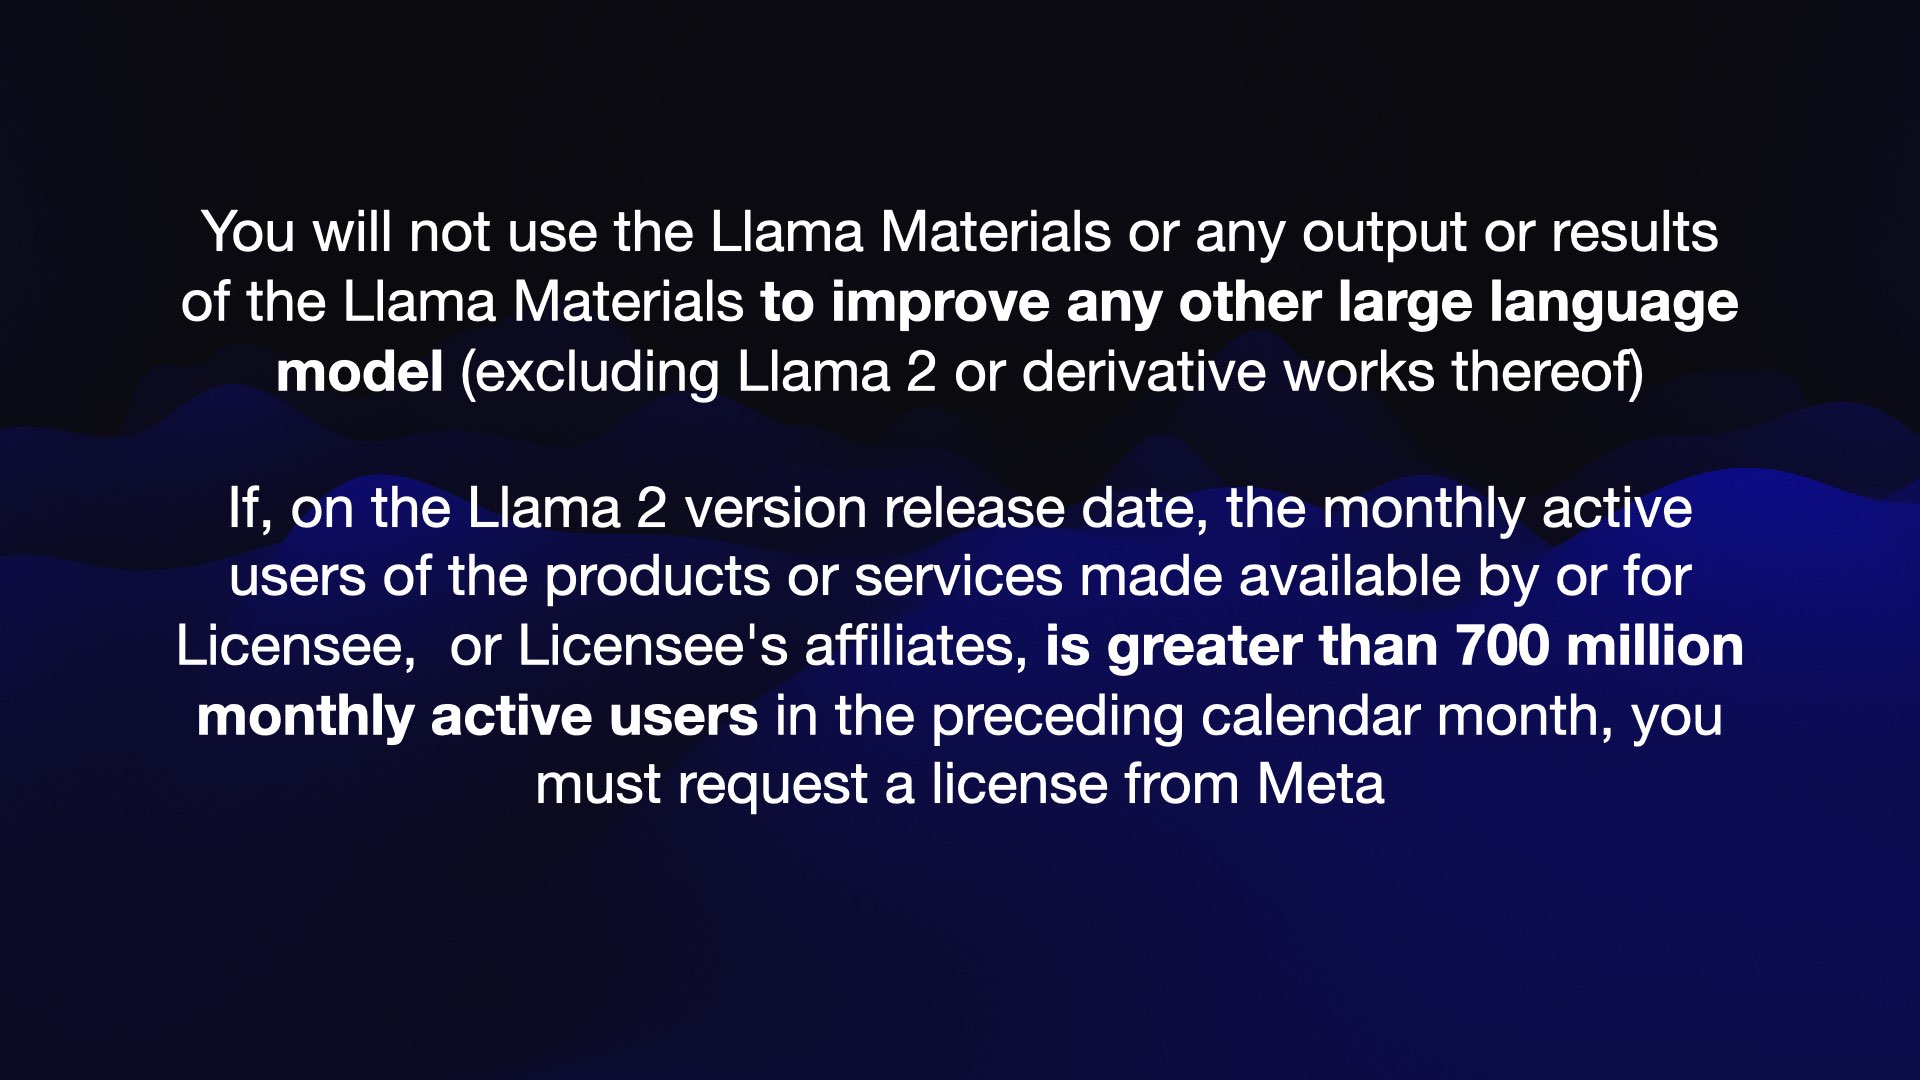 You will not use the Llama Materials or any output or results of the Llama Materials to improve any other large language model (excluding Llama 2 or derivative works thereof)  If, on the Llama 2 version release date, the monthly active users of the products or services made available by or for Licensee, or Licensee's affiliates, is greater than 700 million monthly active users in the preceding calendar month, you must request a license from Meta 